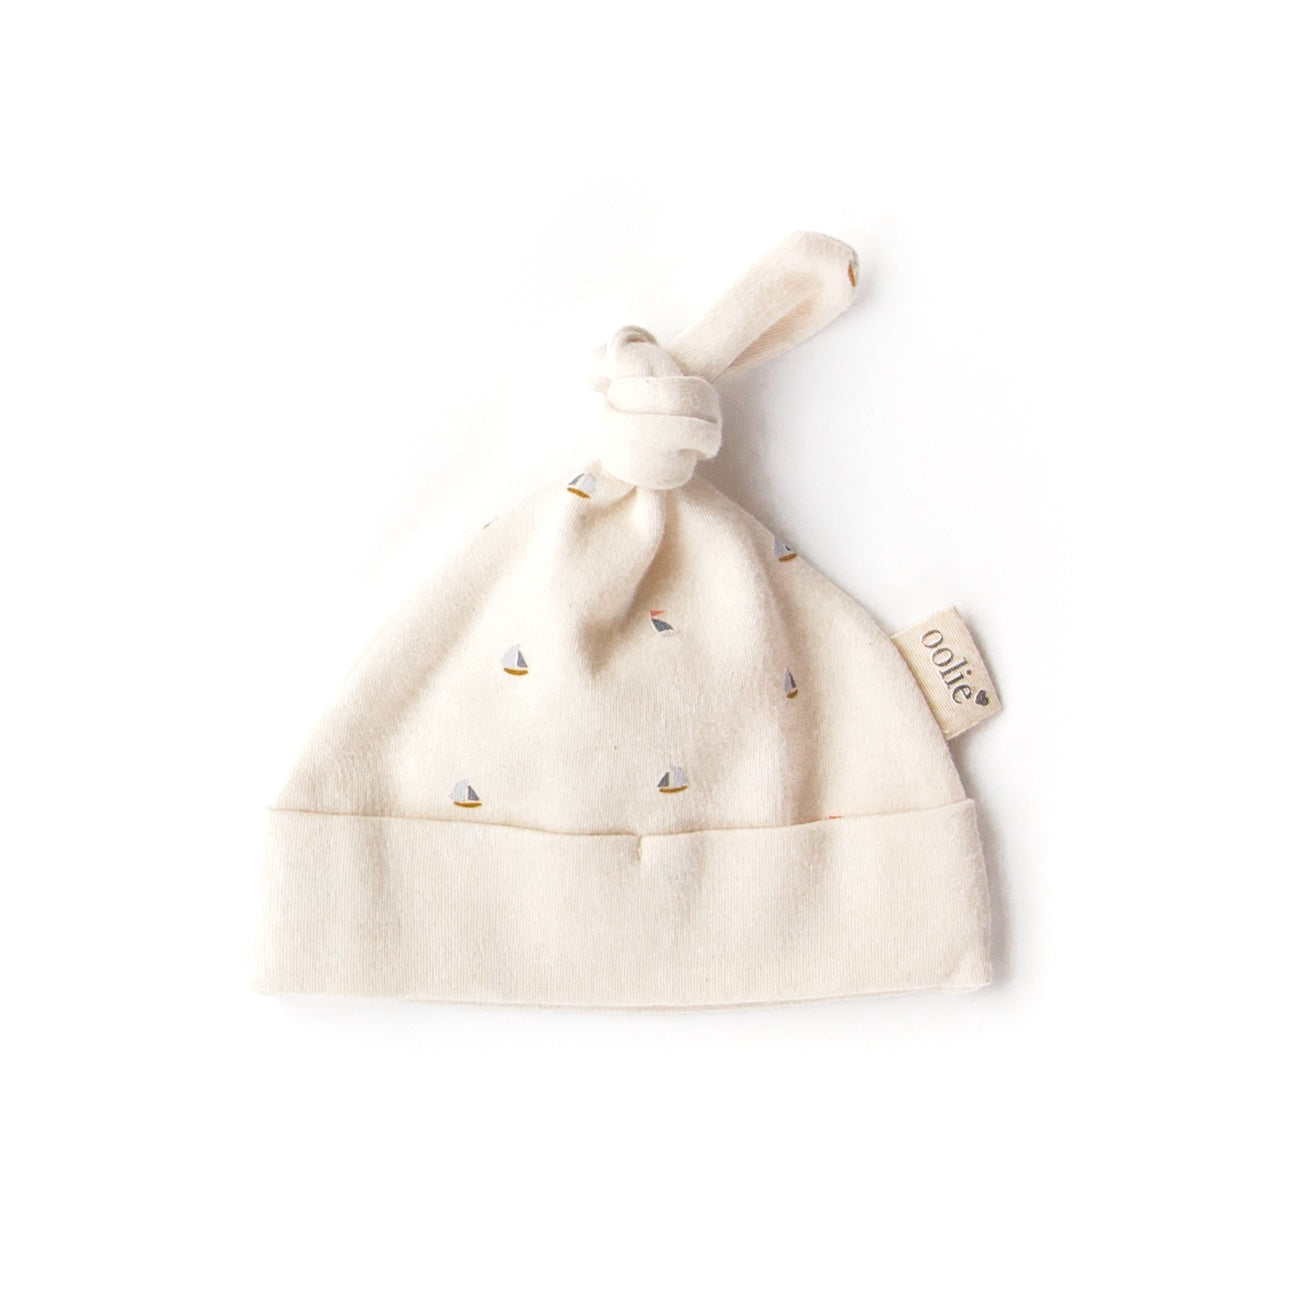 An Oolie organic cotton top knot baby hat with the schooner print, a natural color with small sailboats in a repeating pattern.